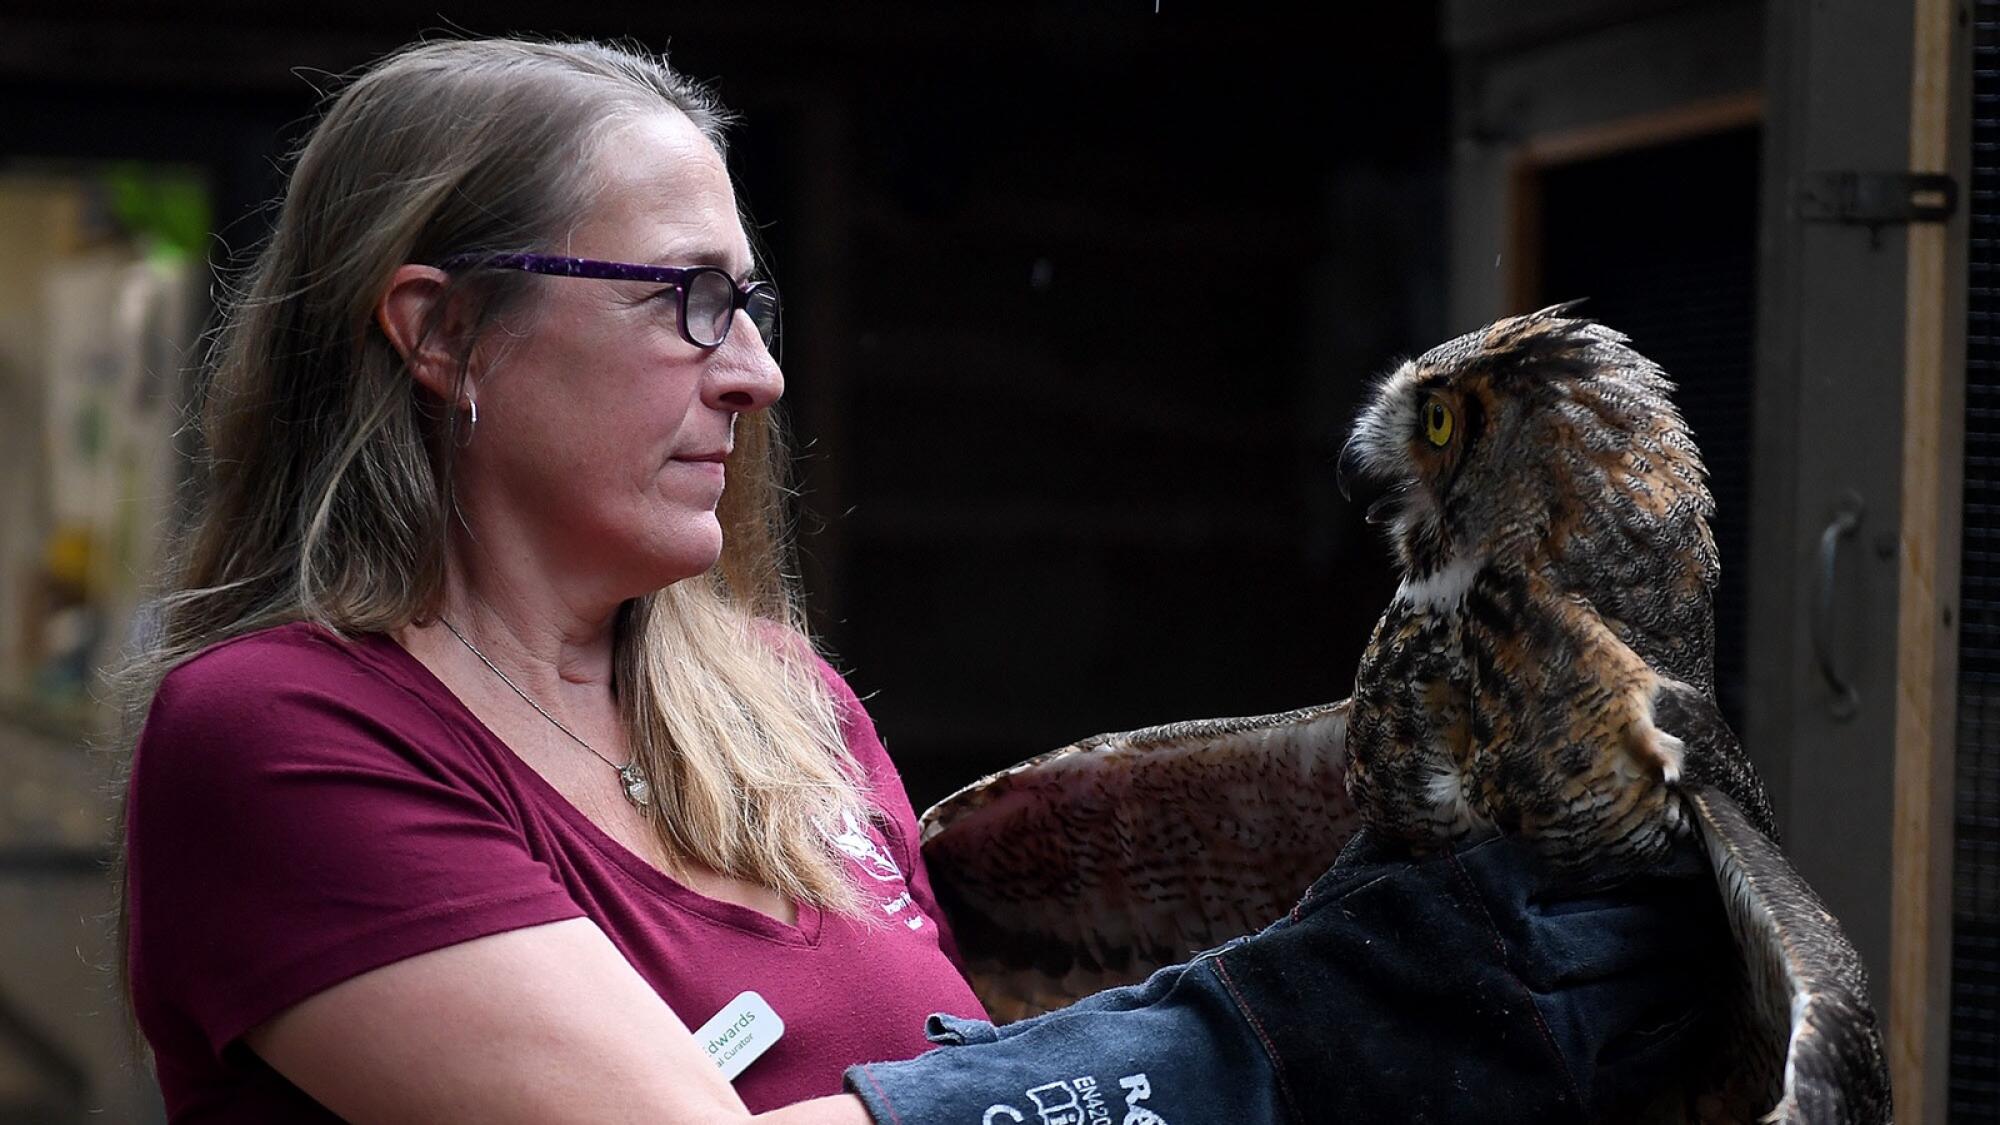 Owl recovering at nature center after run in with a skunk